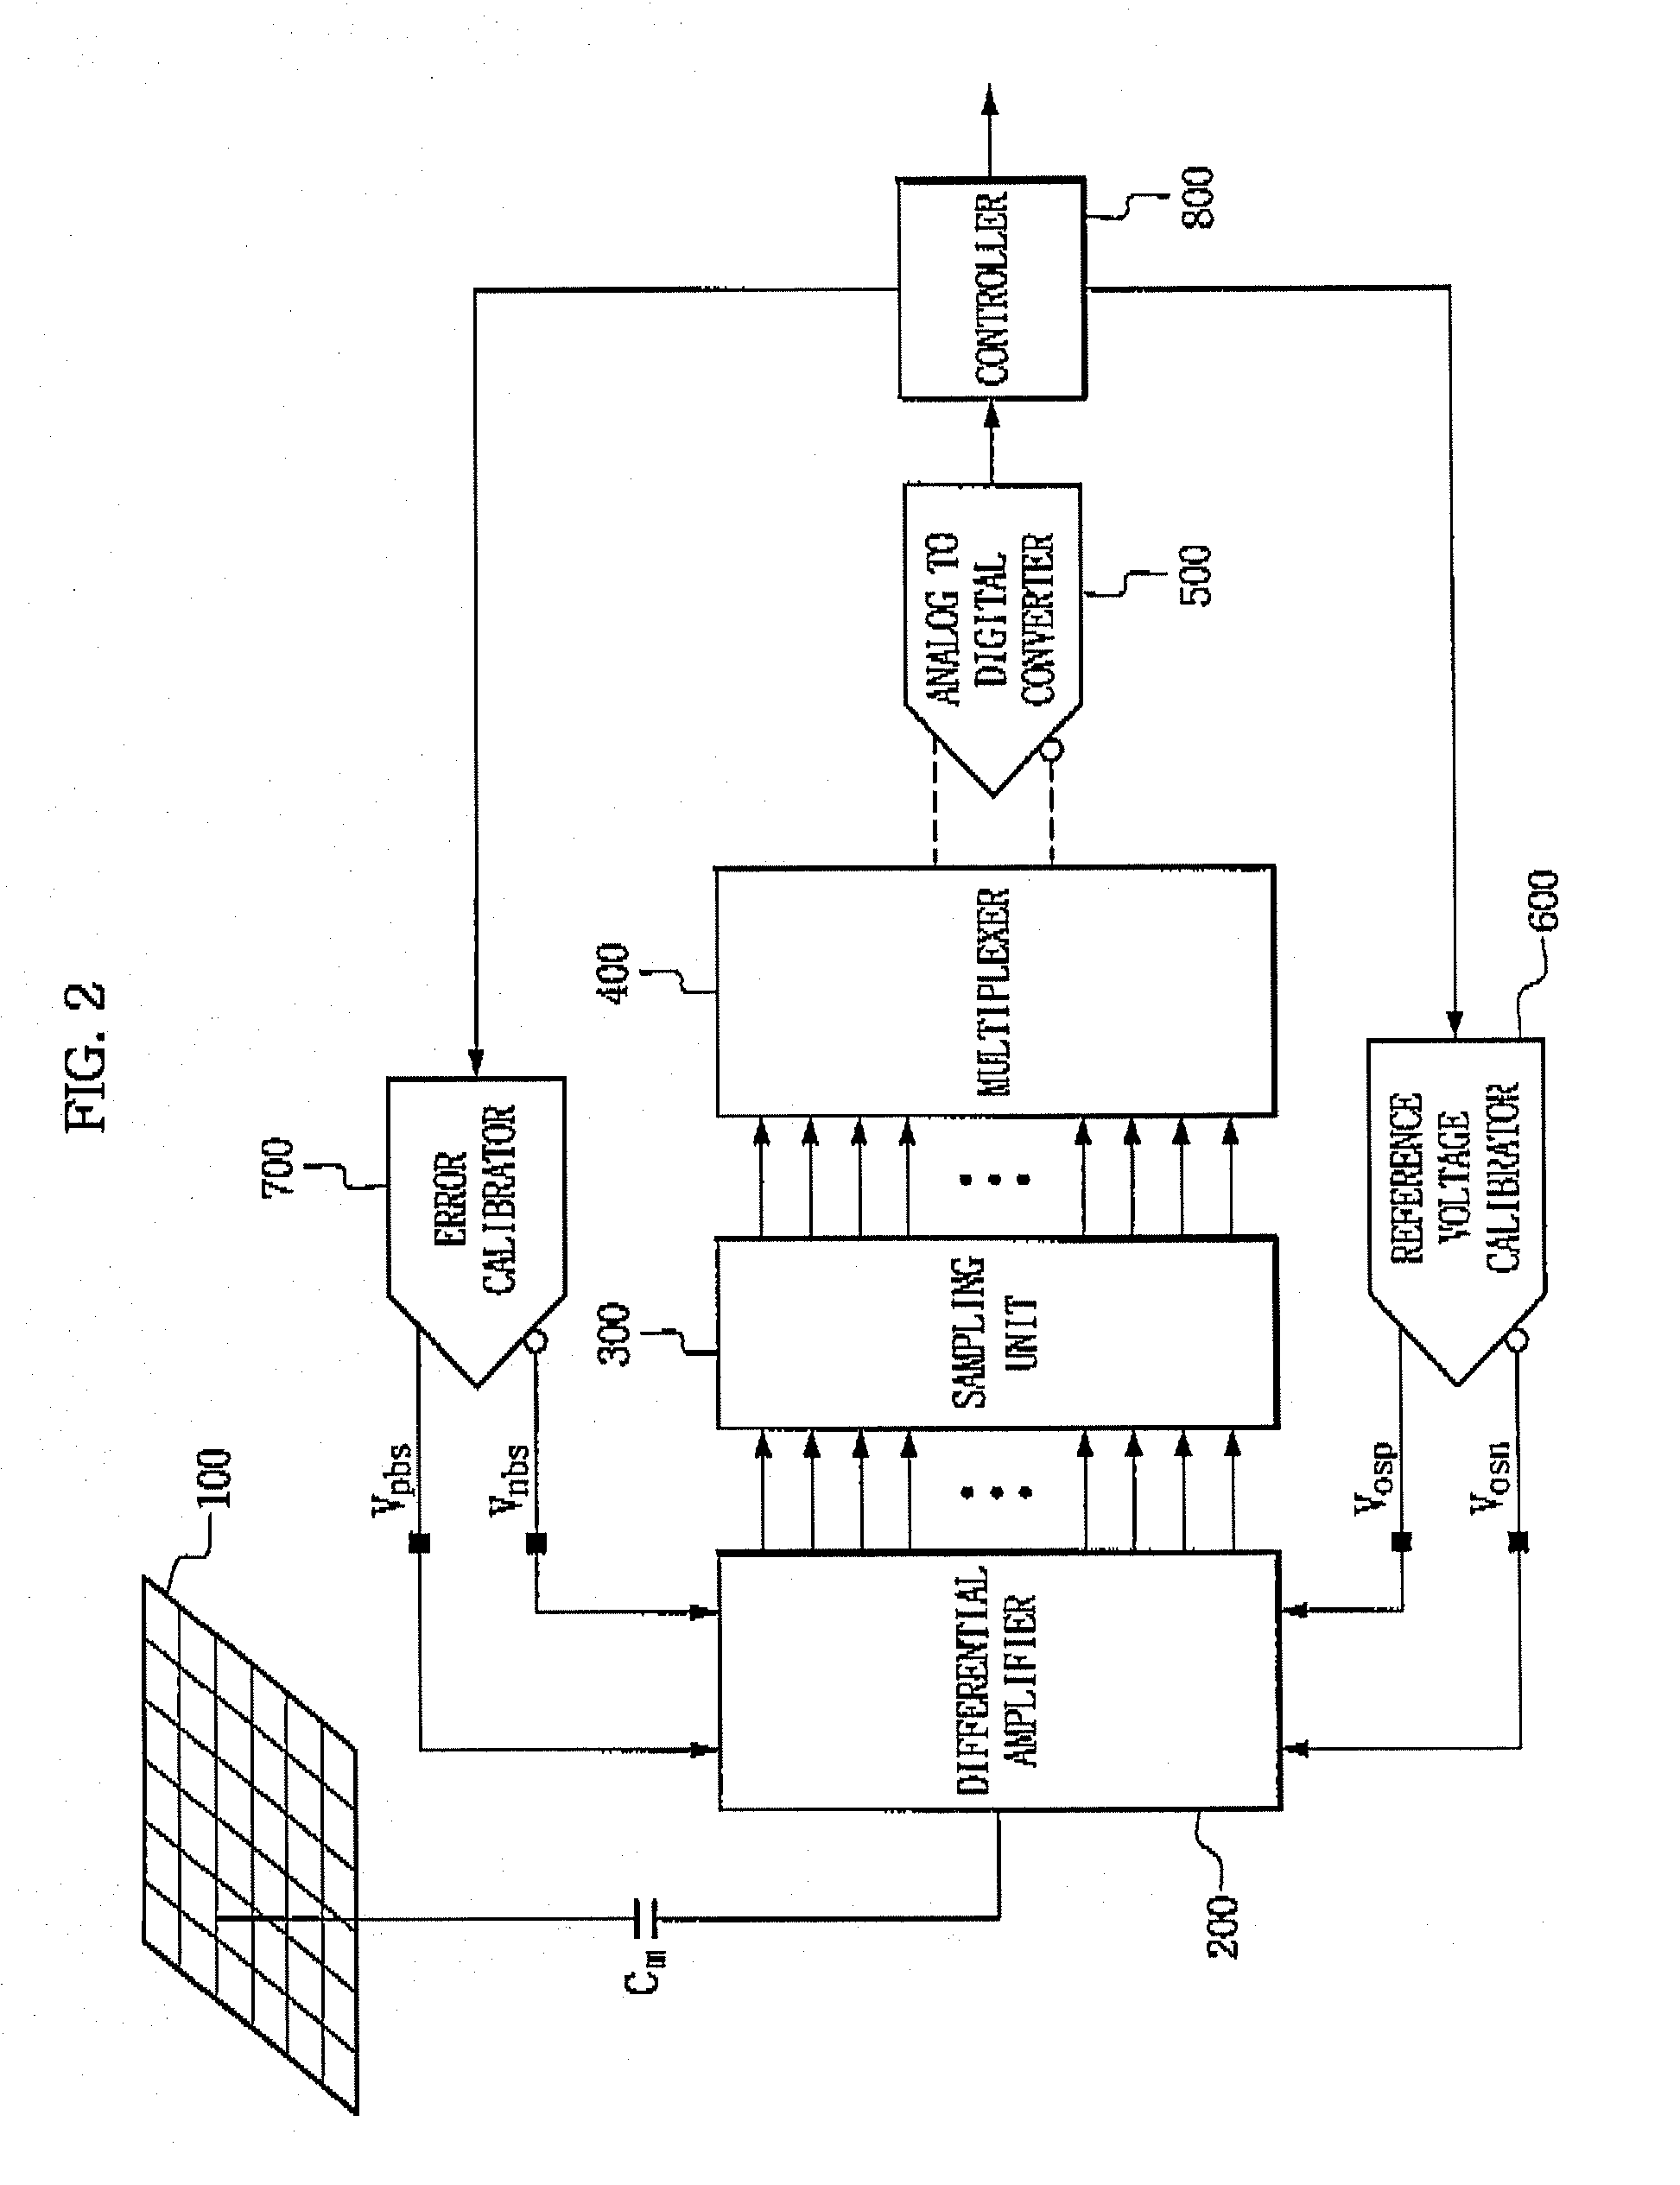 Apparatus for driving touch panel